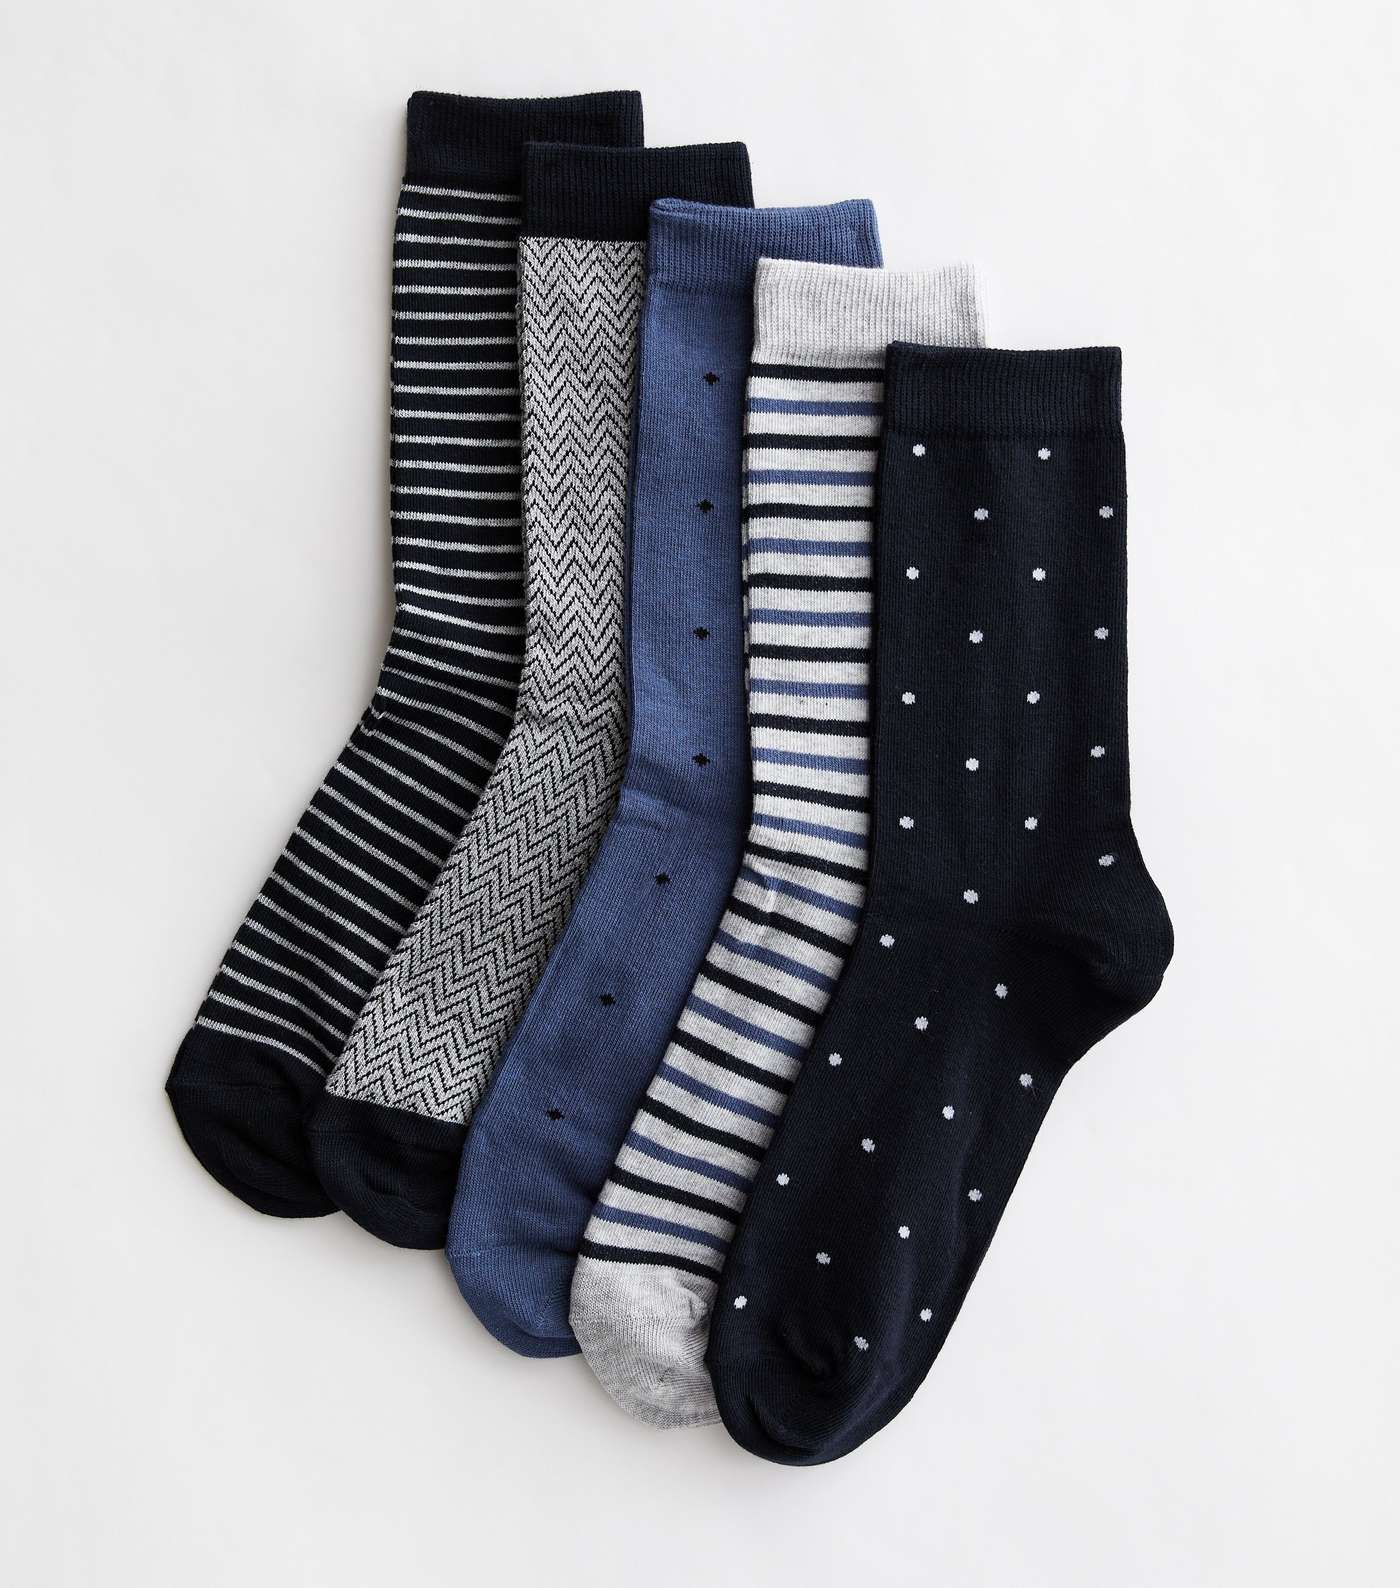 5 Pack Grey Black and Blue Mixed Pattern Socks